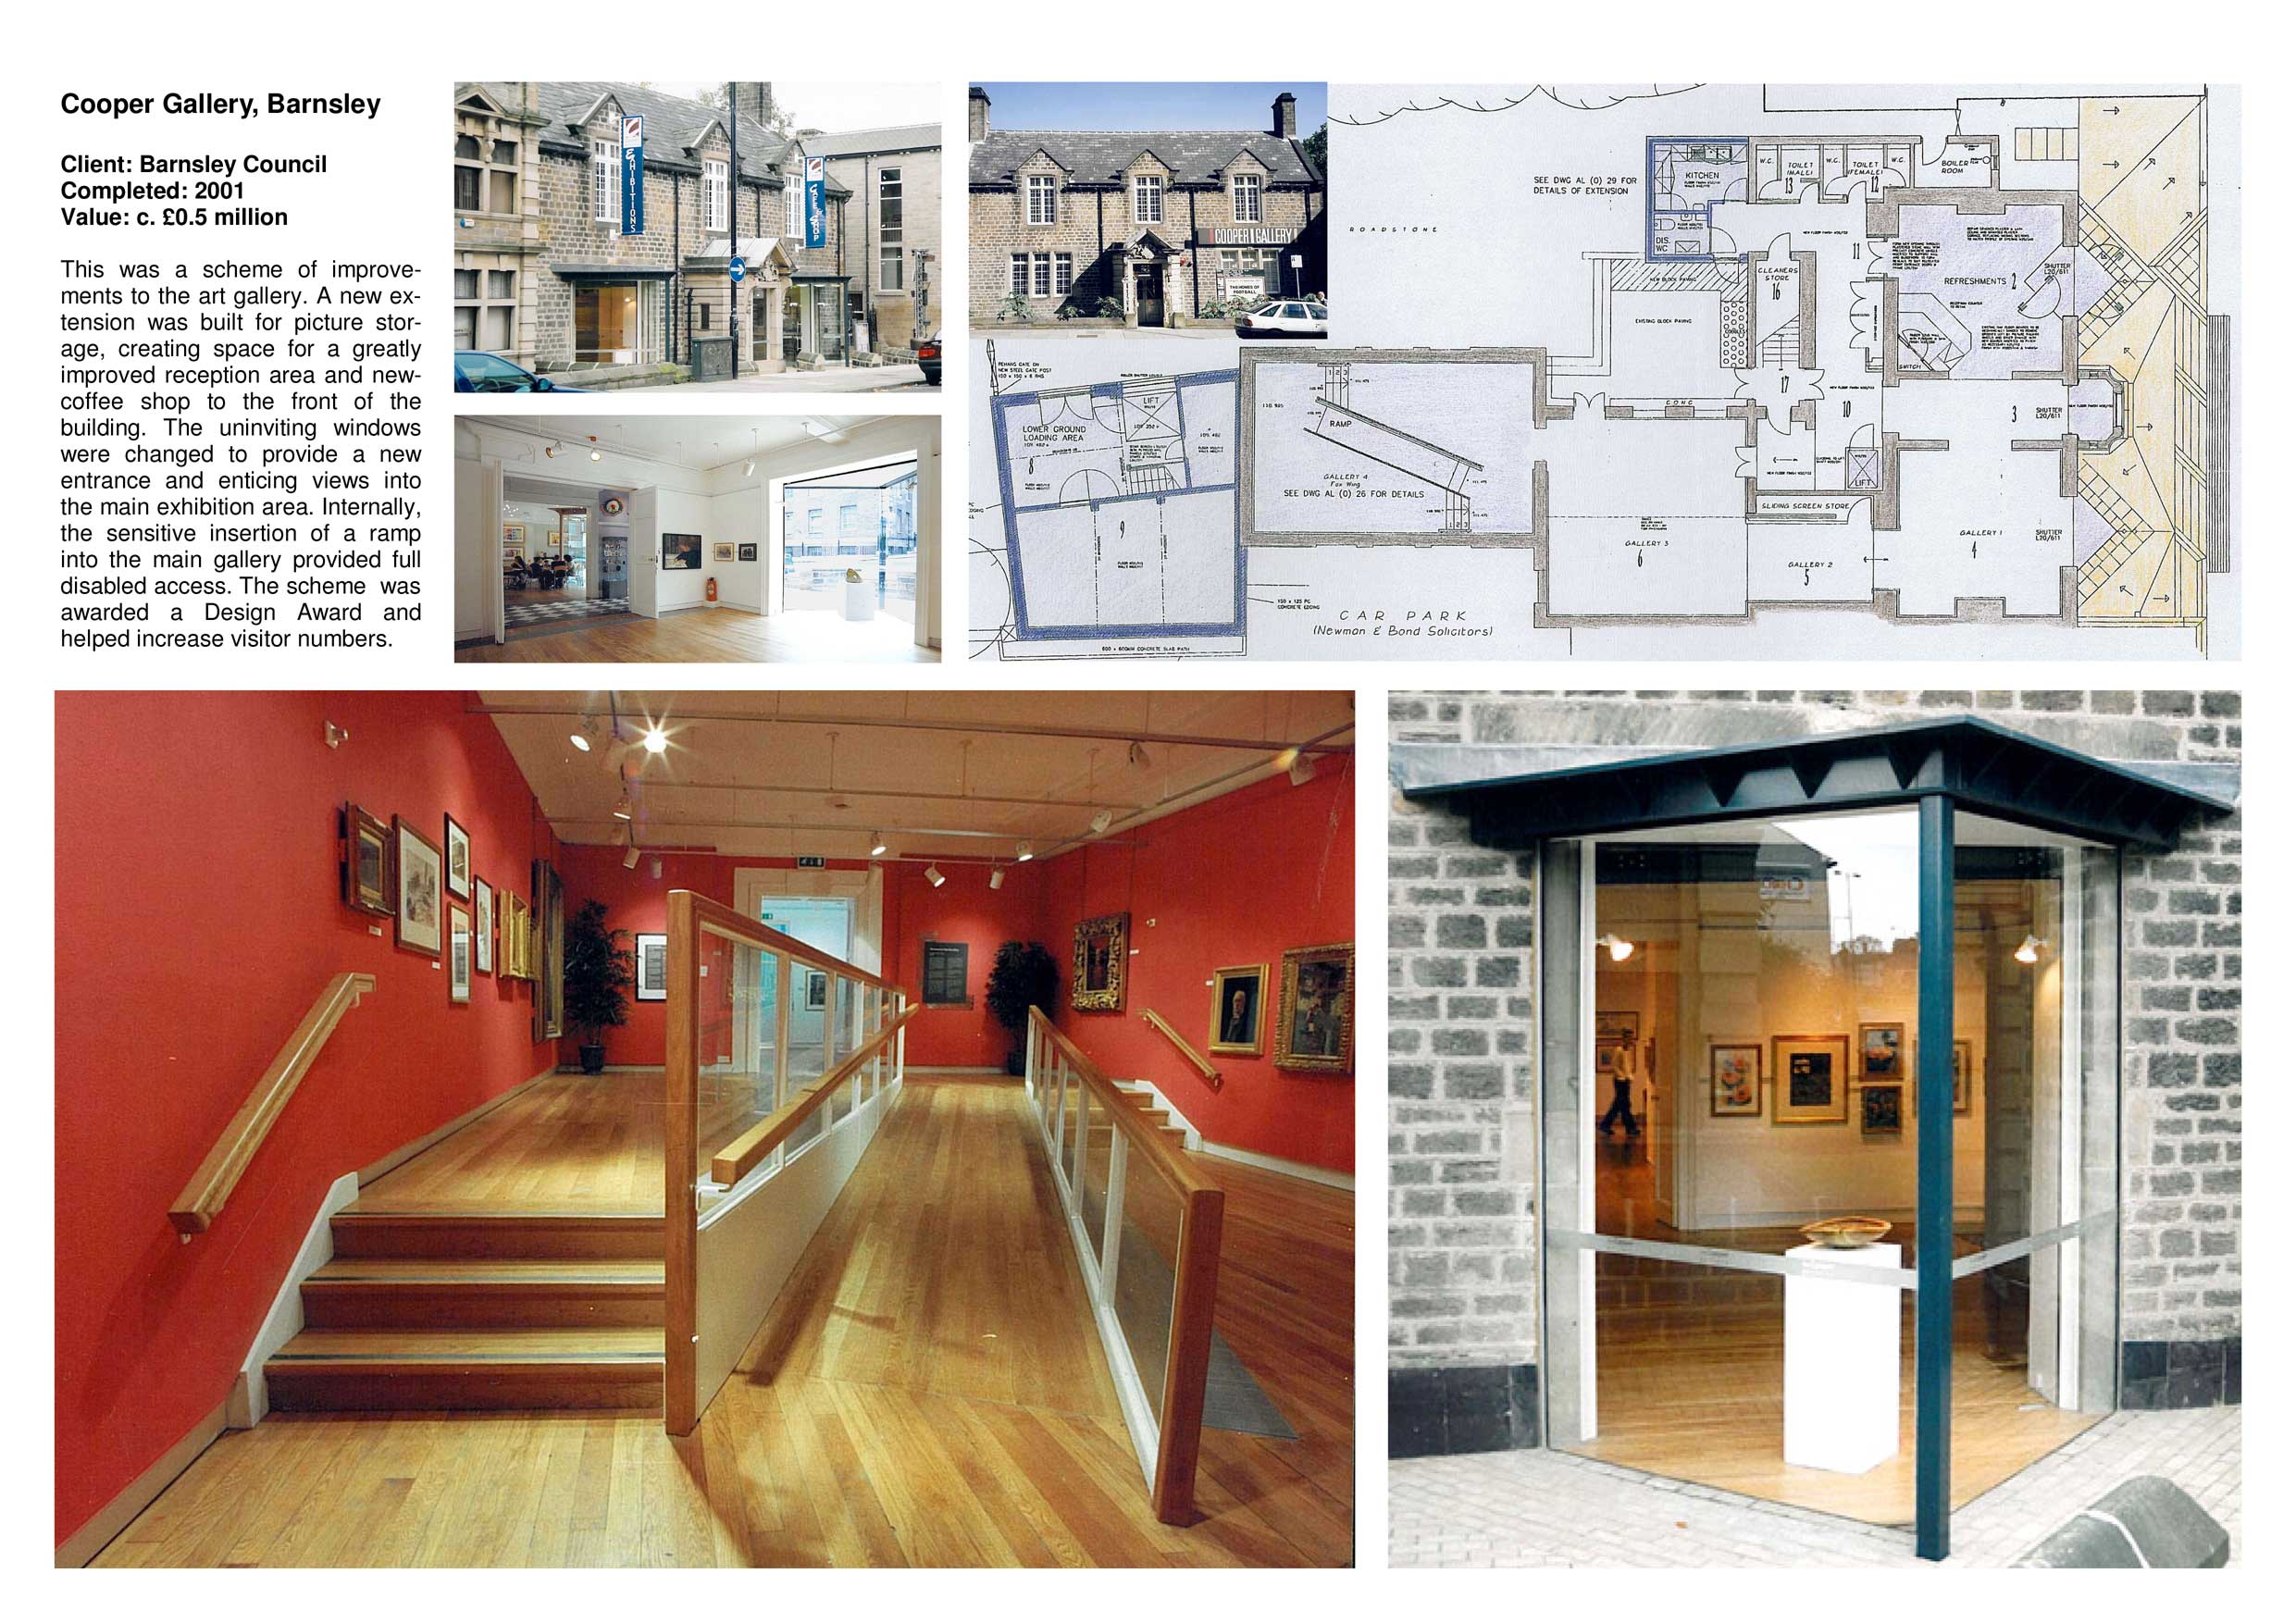 Extensions and alterations to the Cooper Art Gallery Barnsley designed by Darren Mayner